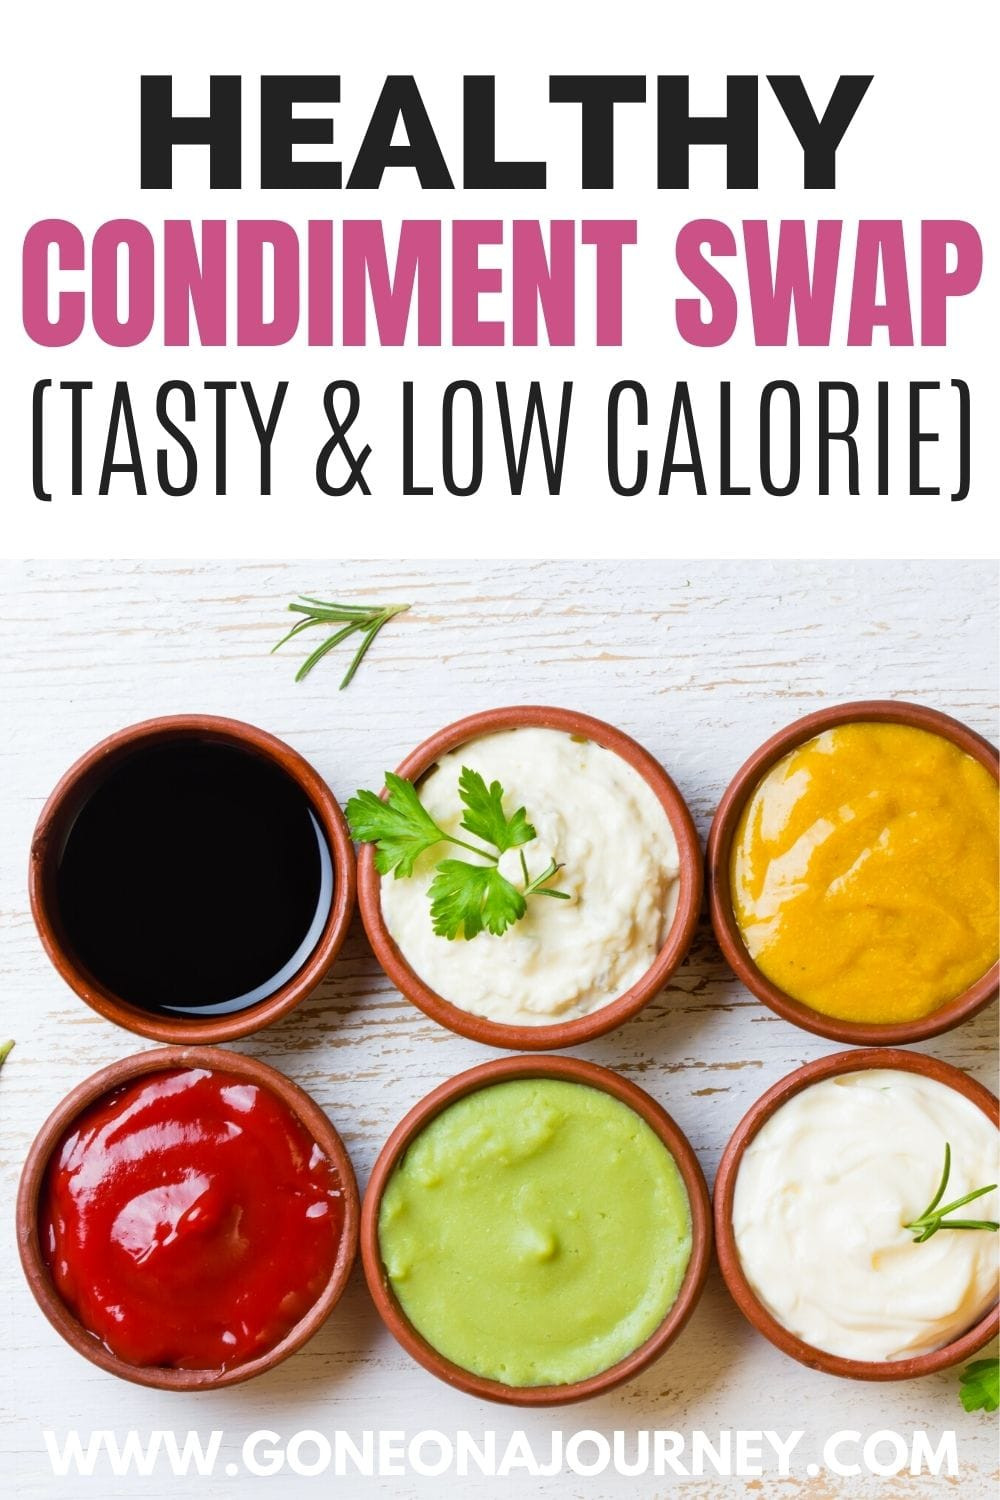 Low Calorie Sauces Best Of 21 Low Calorie Sauces that’ll Bring Life to Your Meals